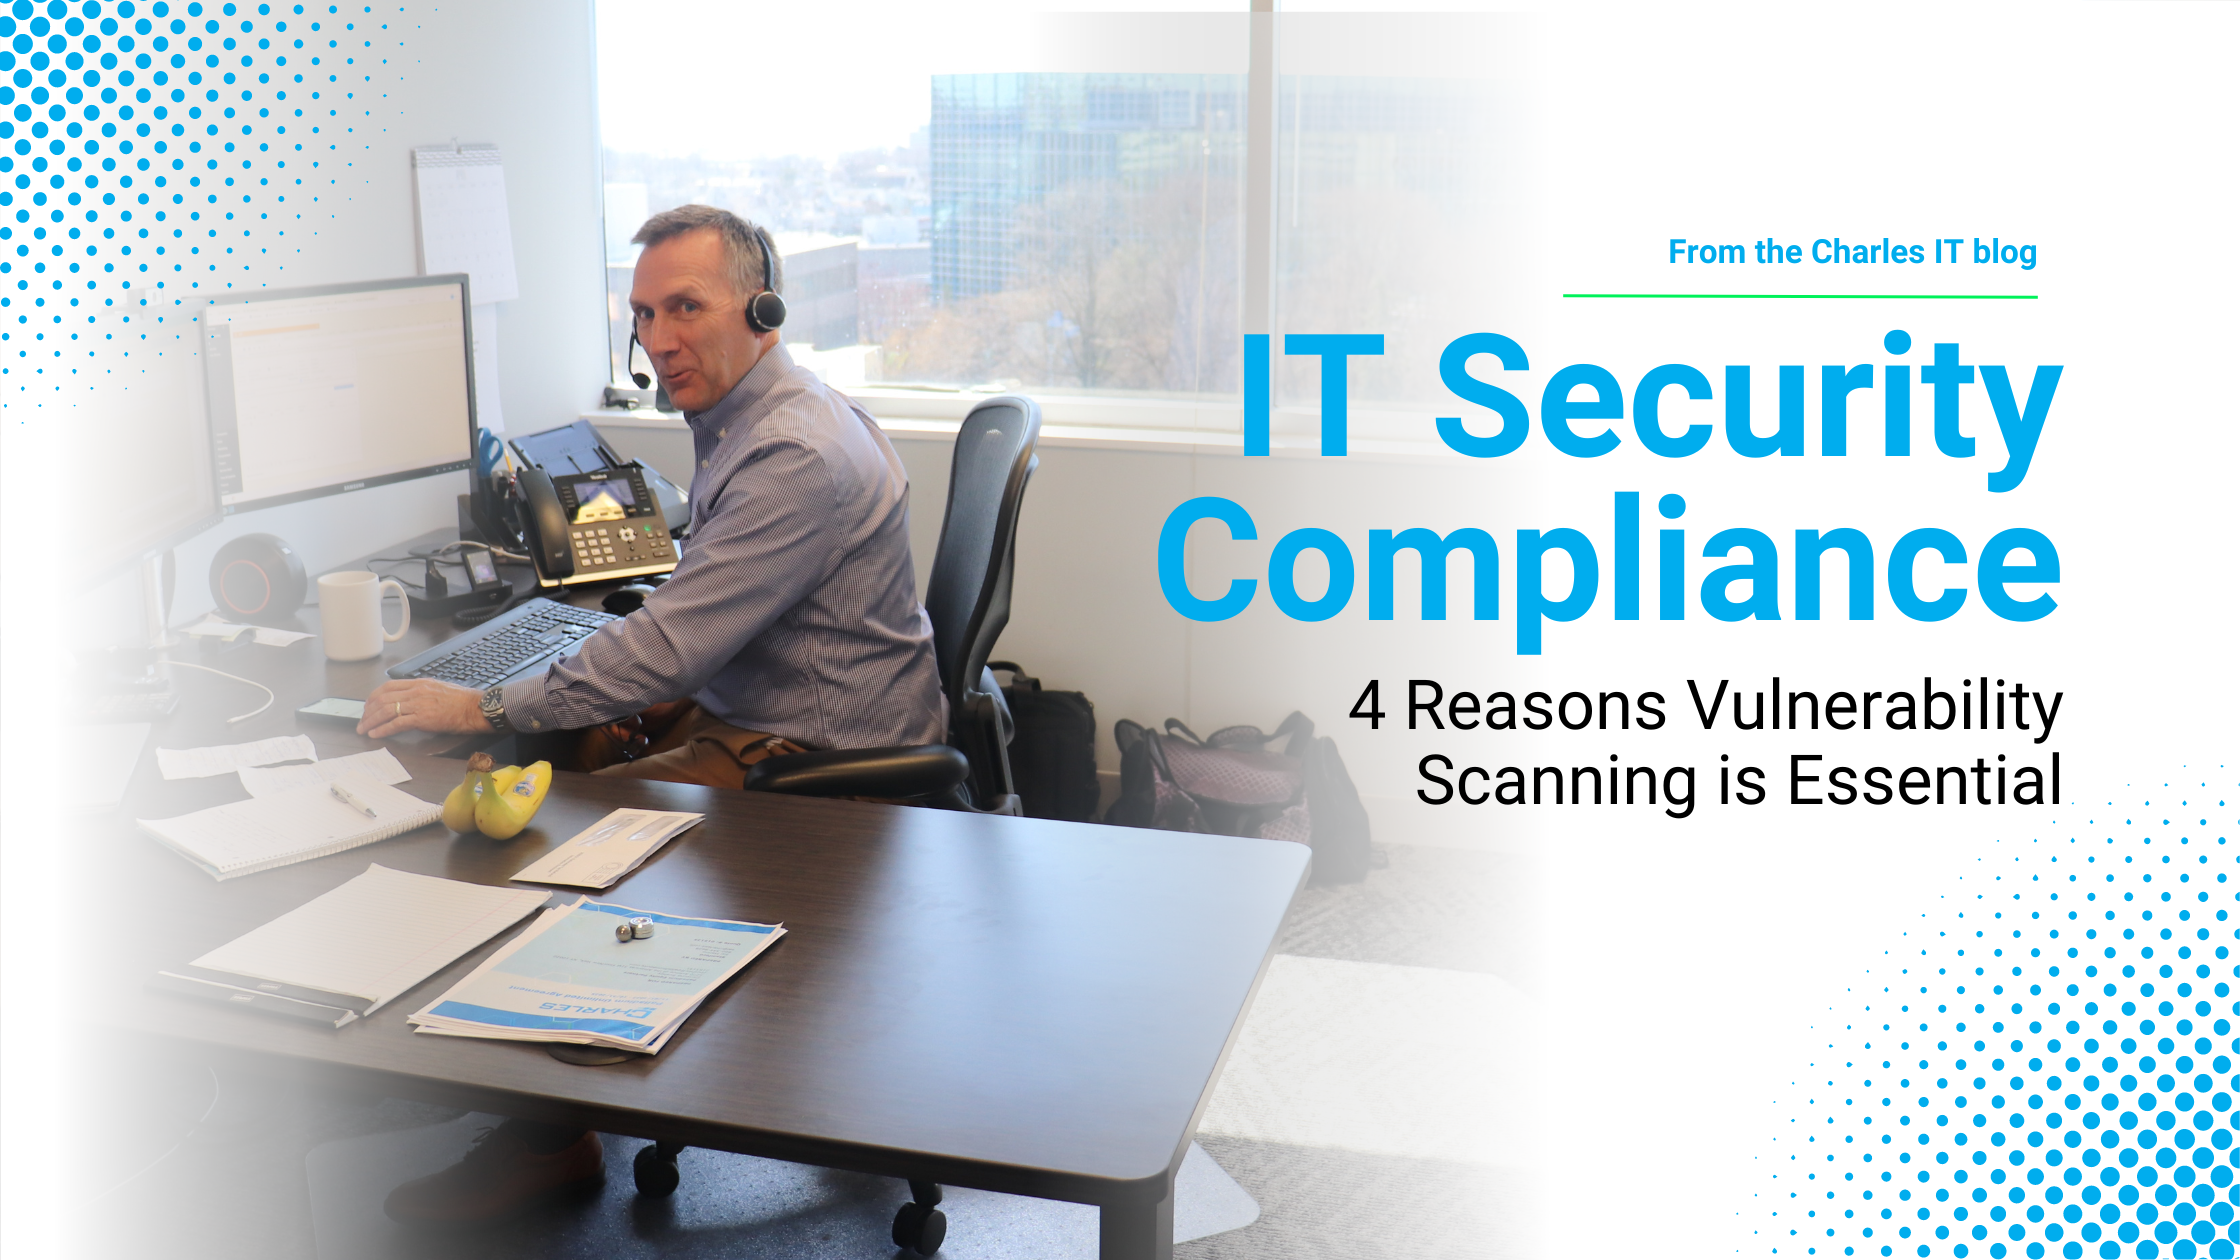 IT Security Compliance: 4 Reasons Vulnerability Scanning Is Essential